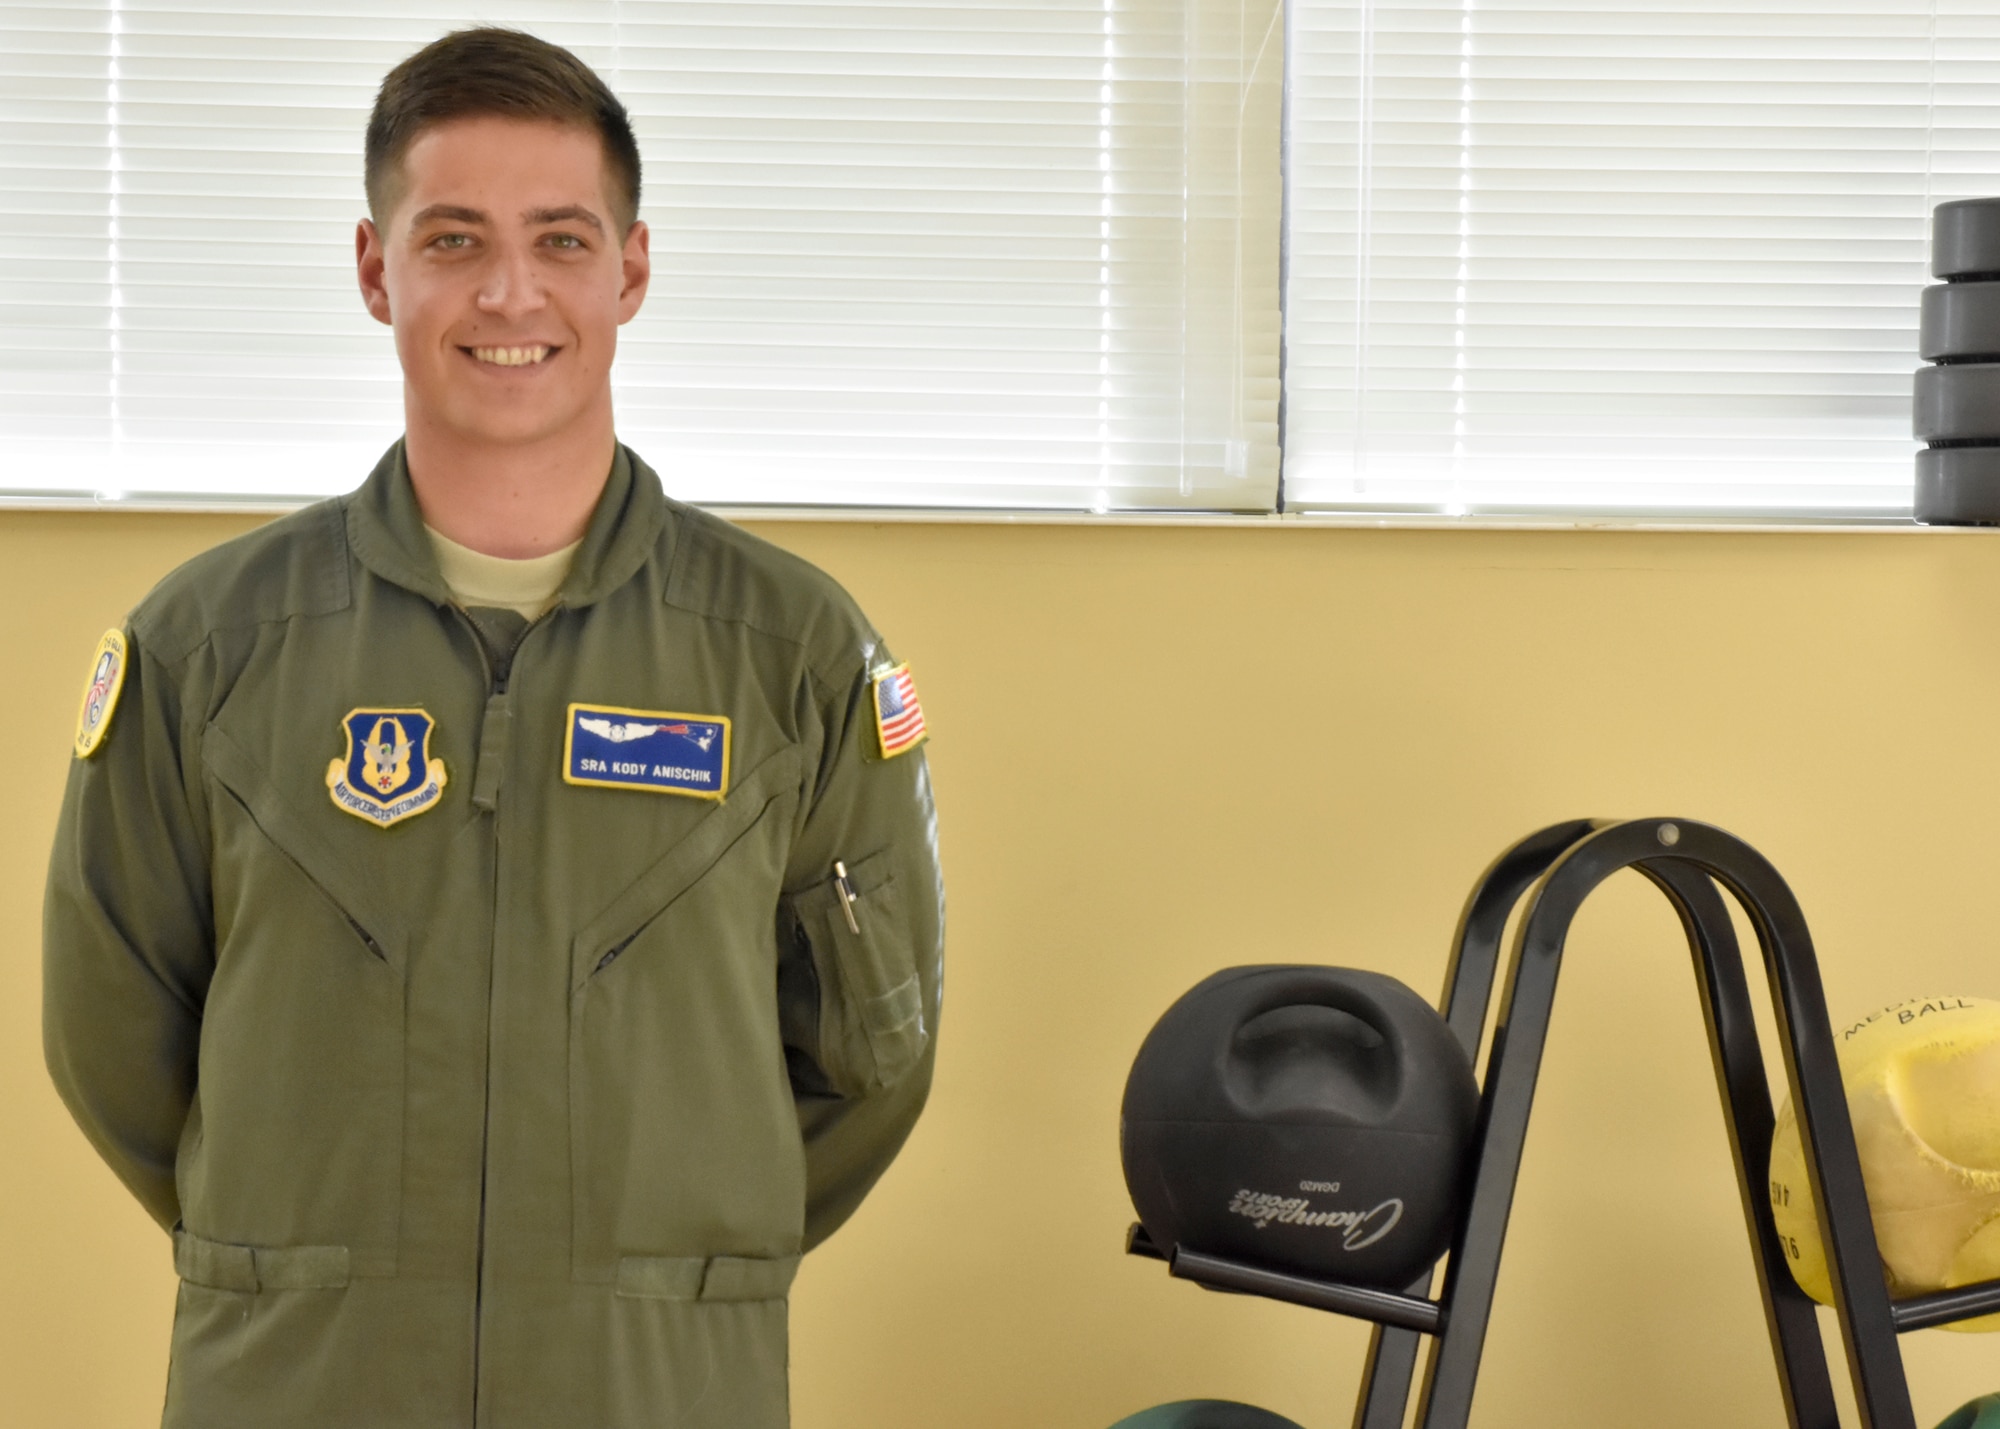 Senior Airman Kody Anischick, 337th Airlift Squadron, recently passed his fitness test after failing three times and being warned that if he failed again, he would be discharged. (U.S. Air Force photo/ TSgt. Amelia Leonard)